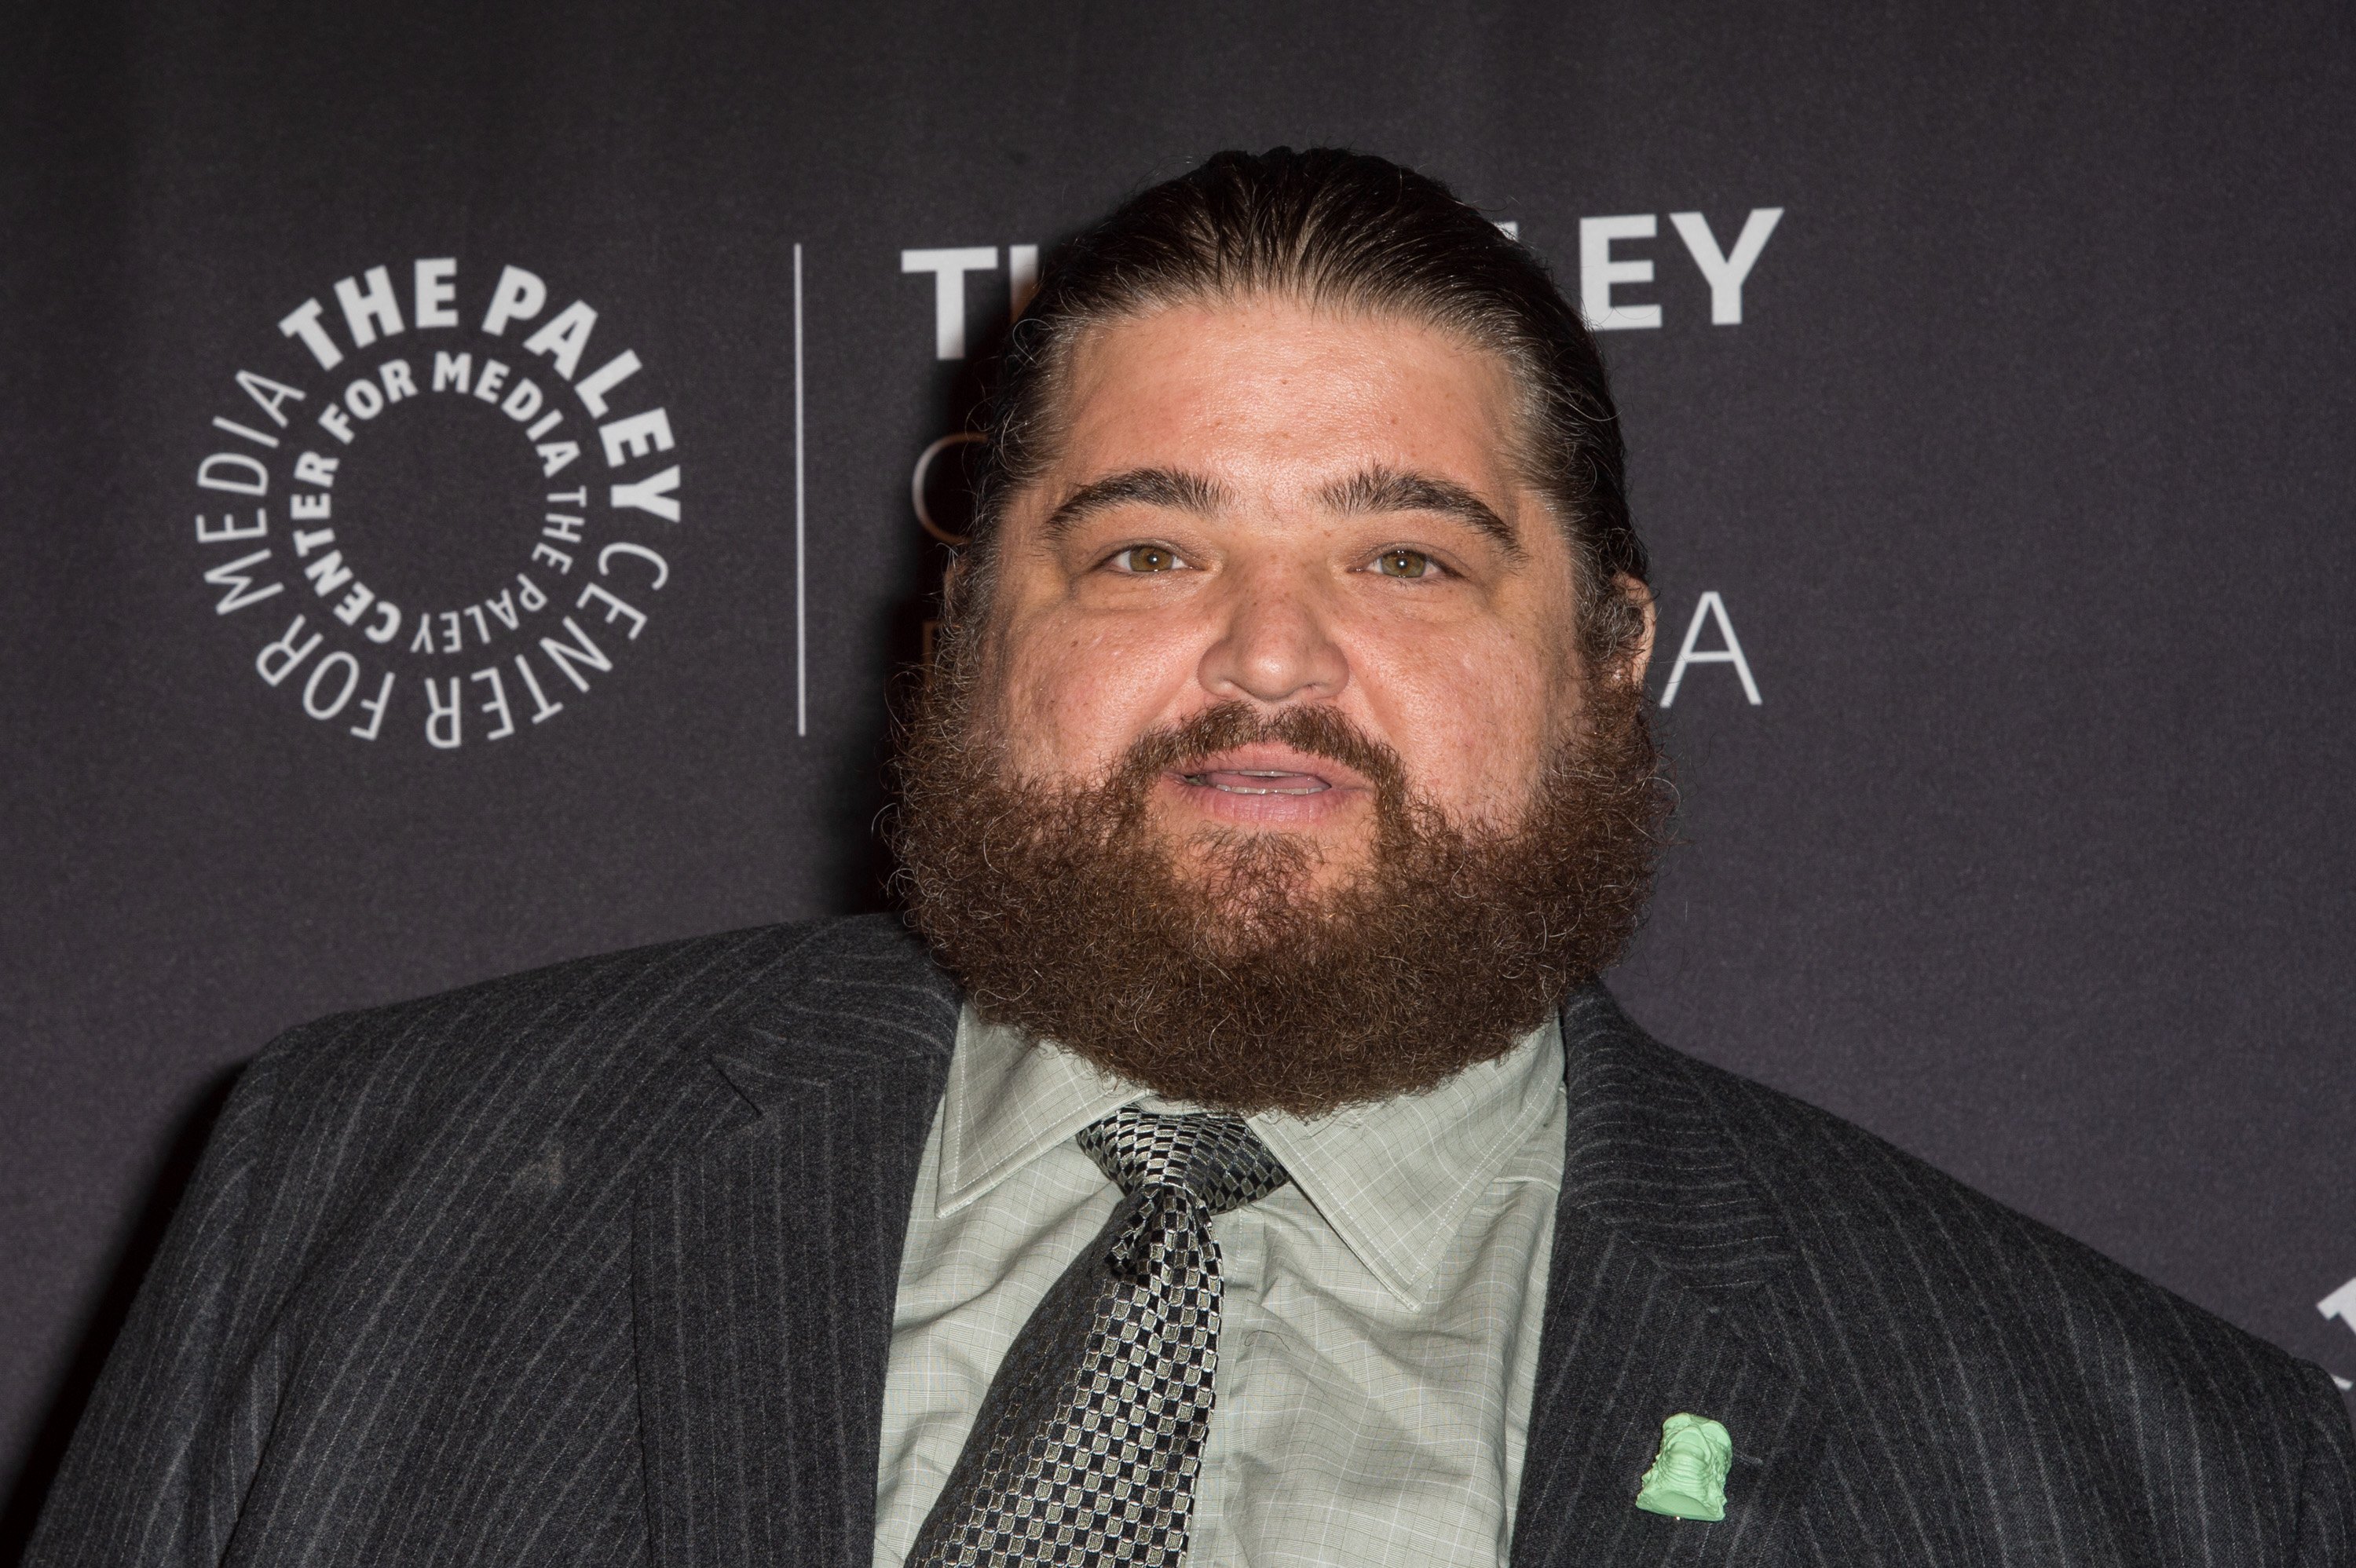 Jorge Garcia during The Paley Center for Media's Hollywood Tribute to Hispanic Achievements in Television event at the Beverly Wilshire Four Seasons Hotel on October 24, 2016 in Beverly Hills, California. | Source: Getty Images